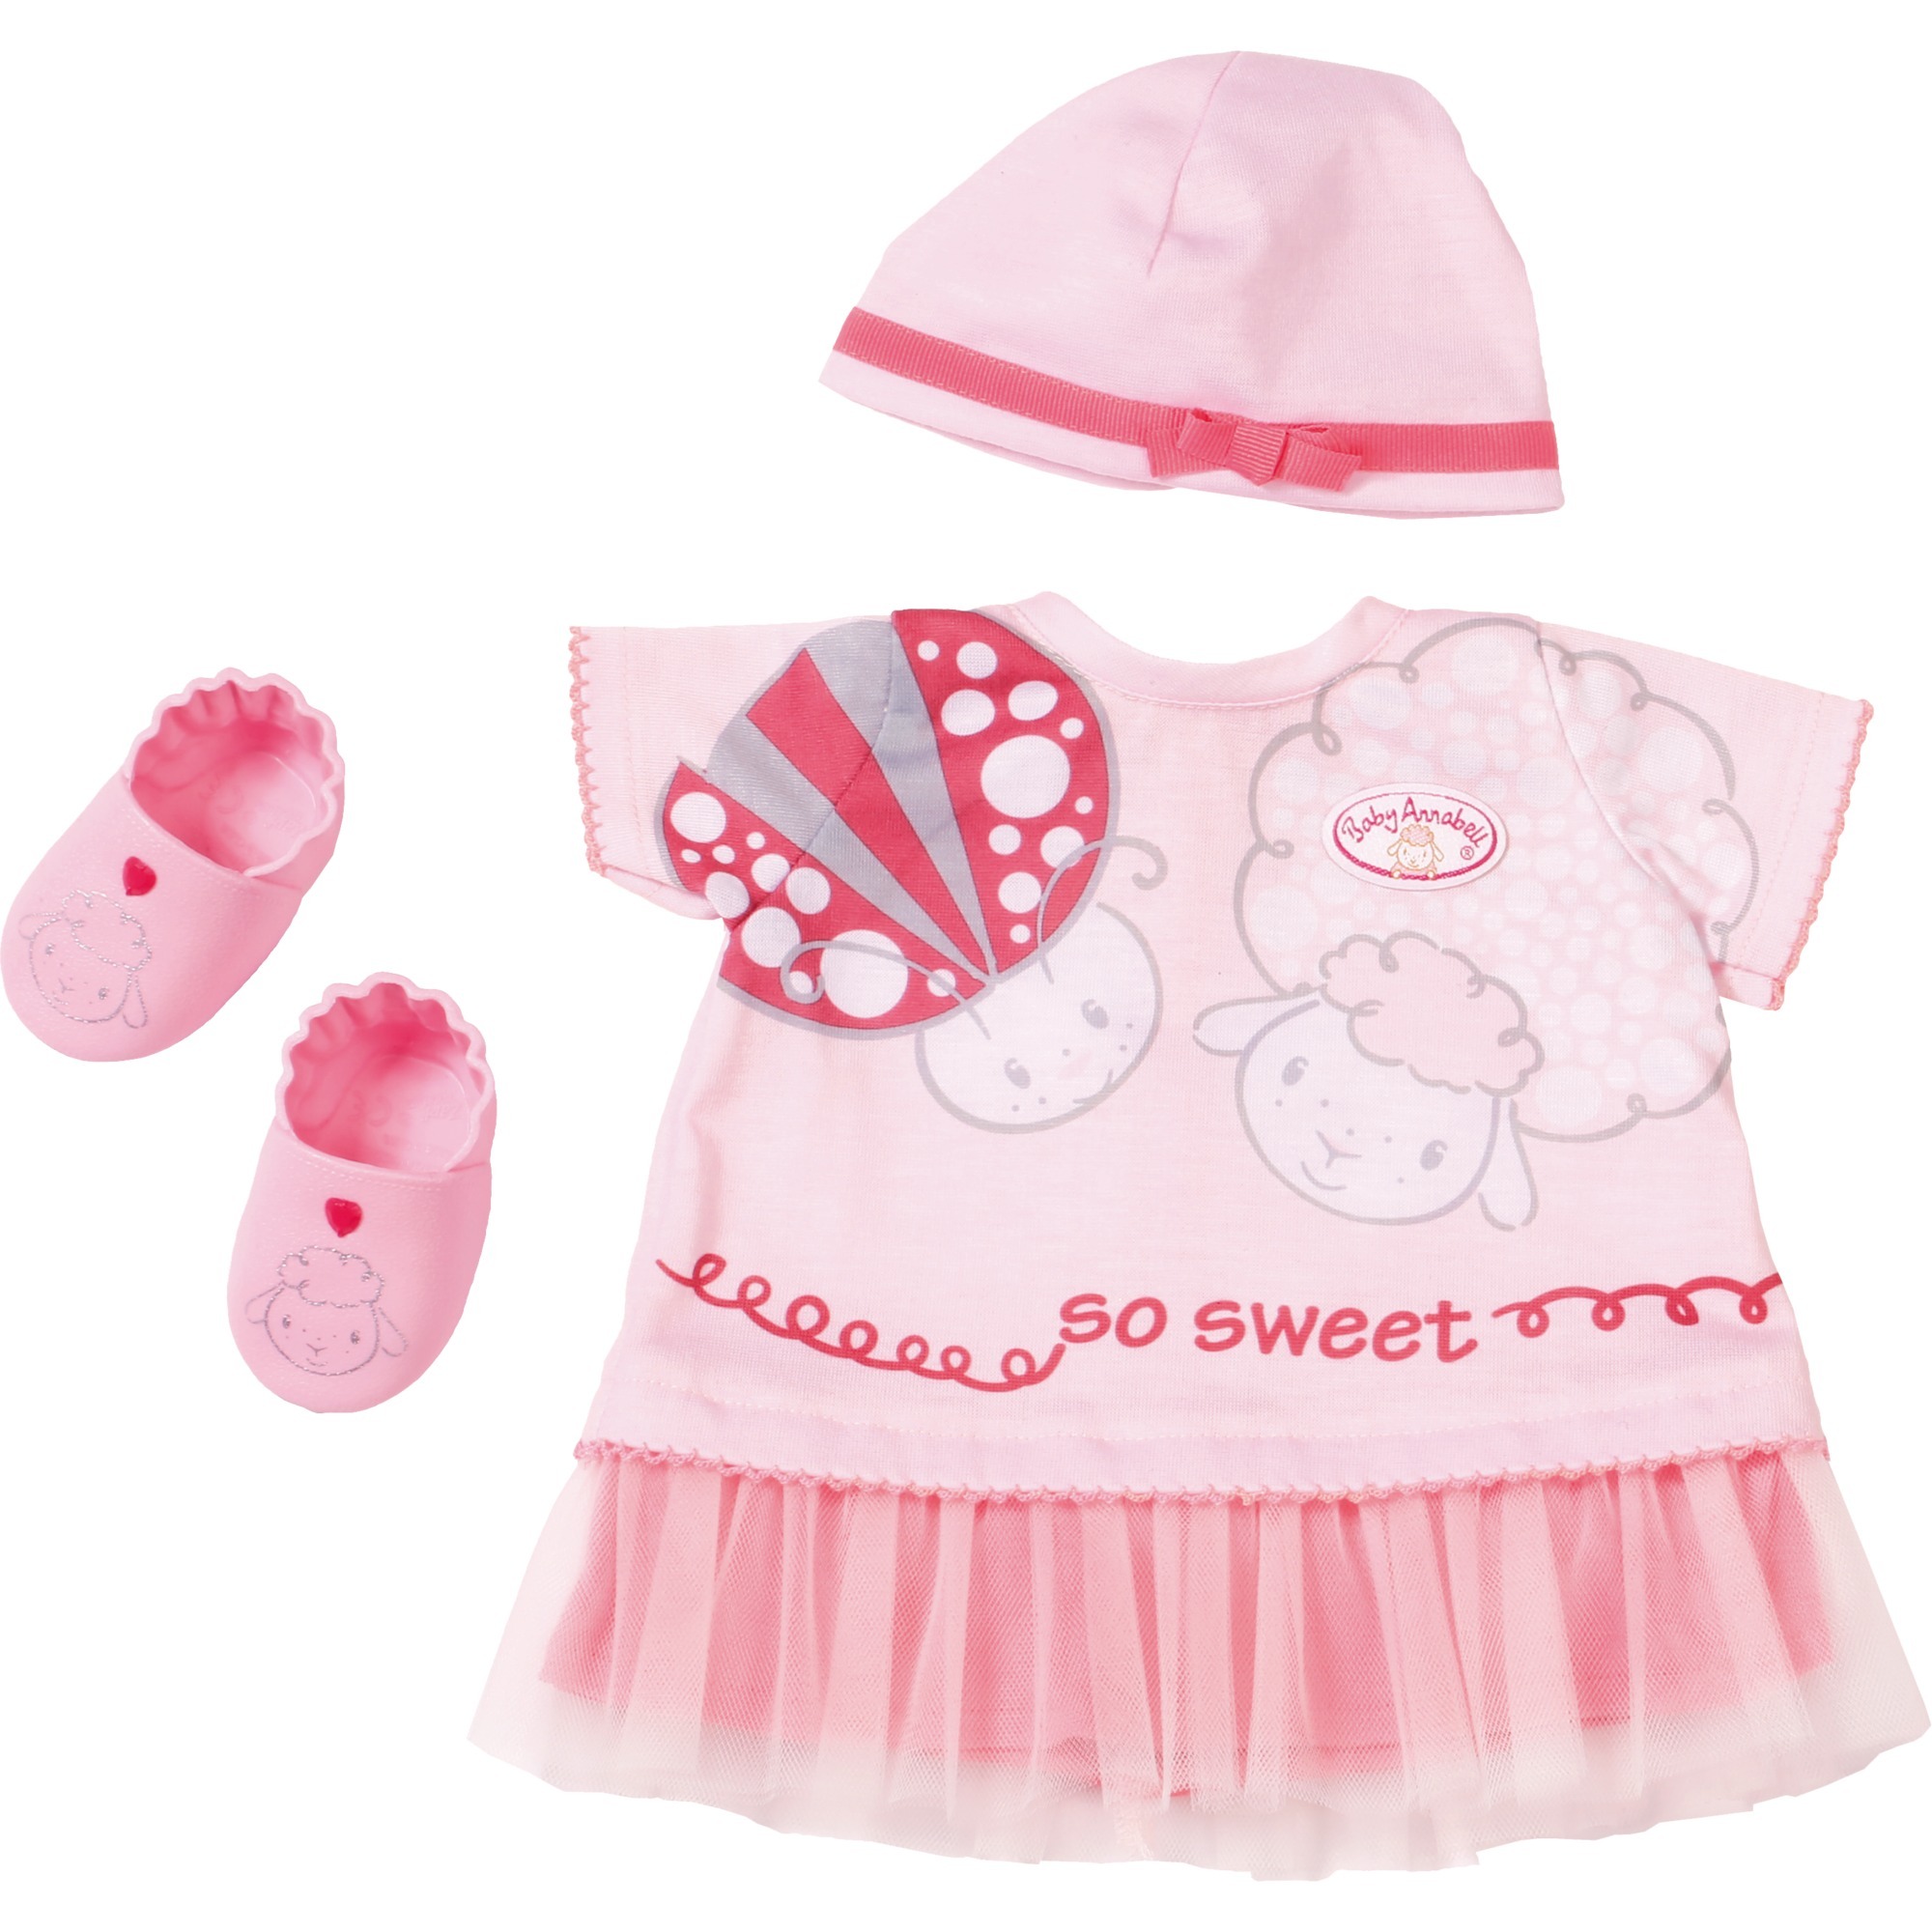 Deluxe Summer Dream, Doll accessories